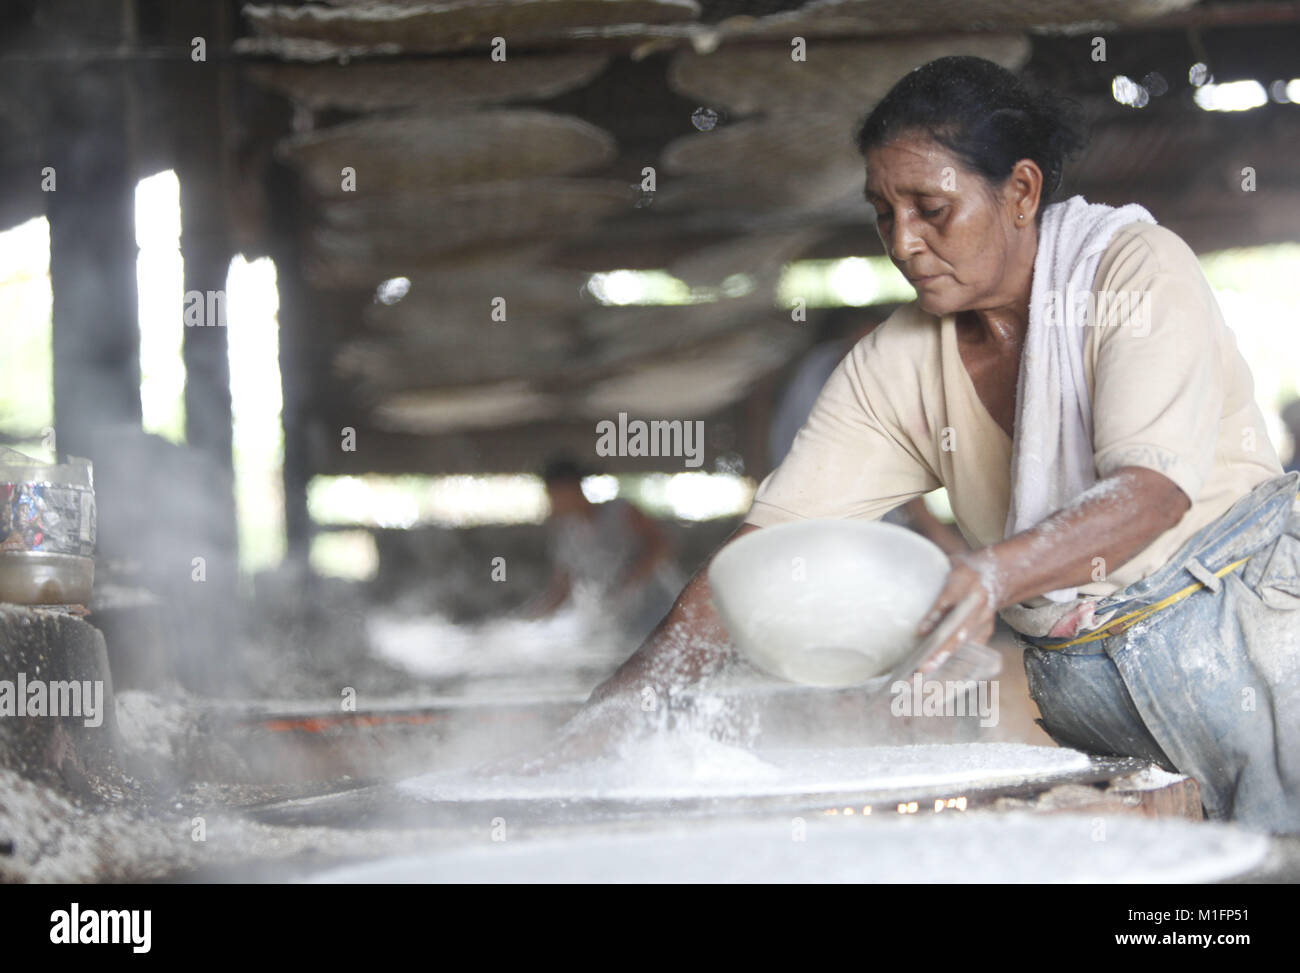 December 8, 2012 - Maturin, Monagas, Venezuela - december 09, 2012.A woman tends the nepe in the budare (flour made from bitter yucca) and the cooking of the cassabe begins.The casabe or cazabe is part of the tradition of the Venezuelan as its indigenous people elaborated it and it is known as the Venezuelan bread. In the city of Maturâ€™n, Monagas state. Venezuela .foto: Juan Carlos Hernandez (Credit Image: © Juan Carlos Hernandez via ZUMA Wire) Stock Photo